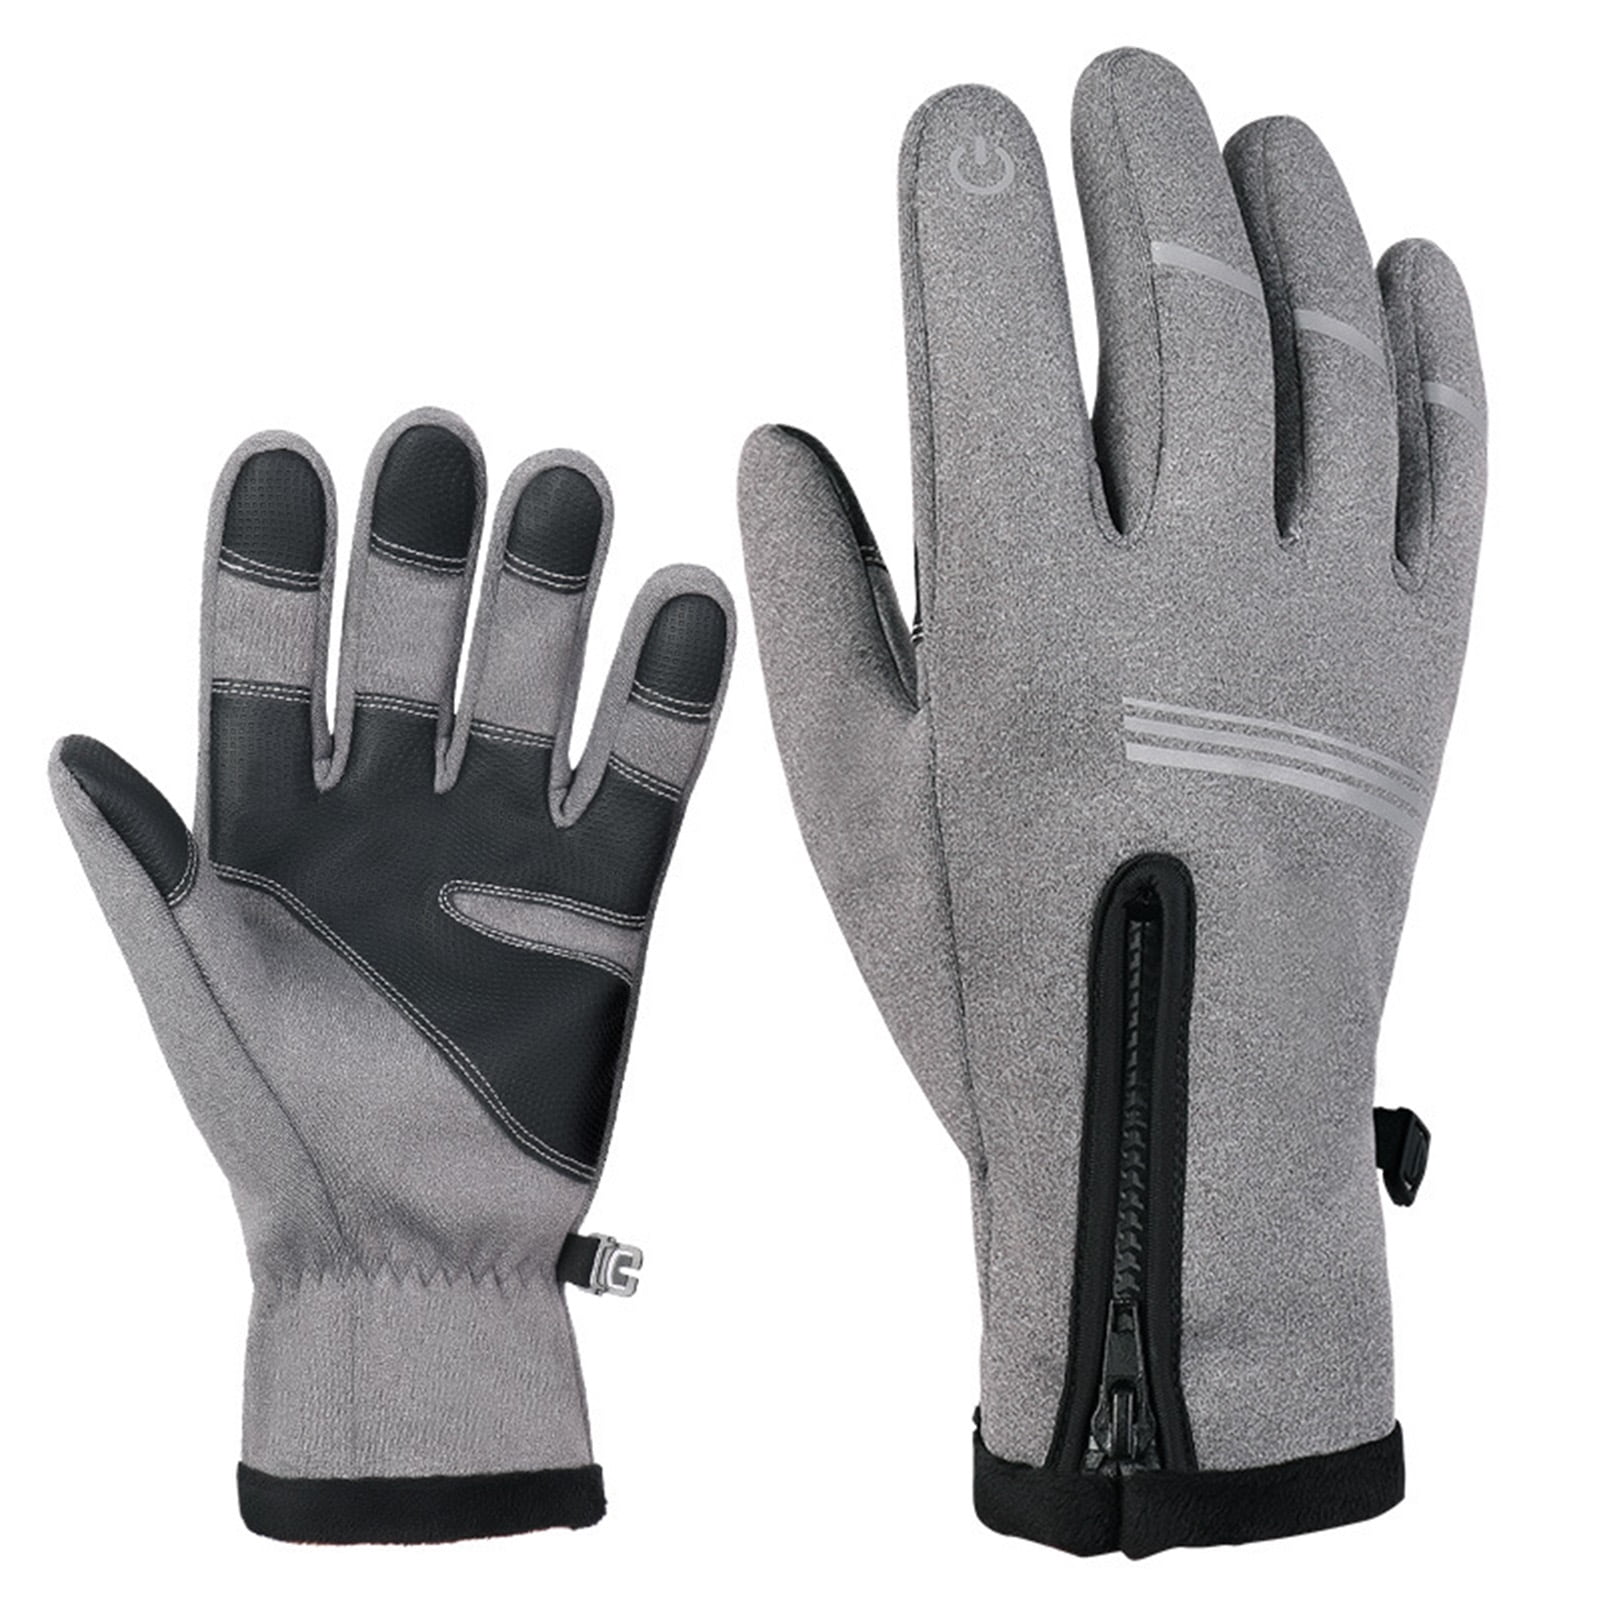 Wind-proof Waterproof Gloves Winter Touch Screen Ski Gloves Cycling Gloves Hot!